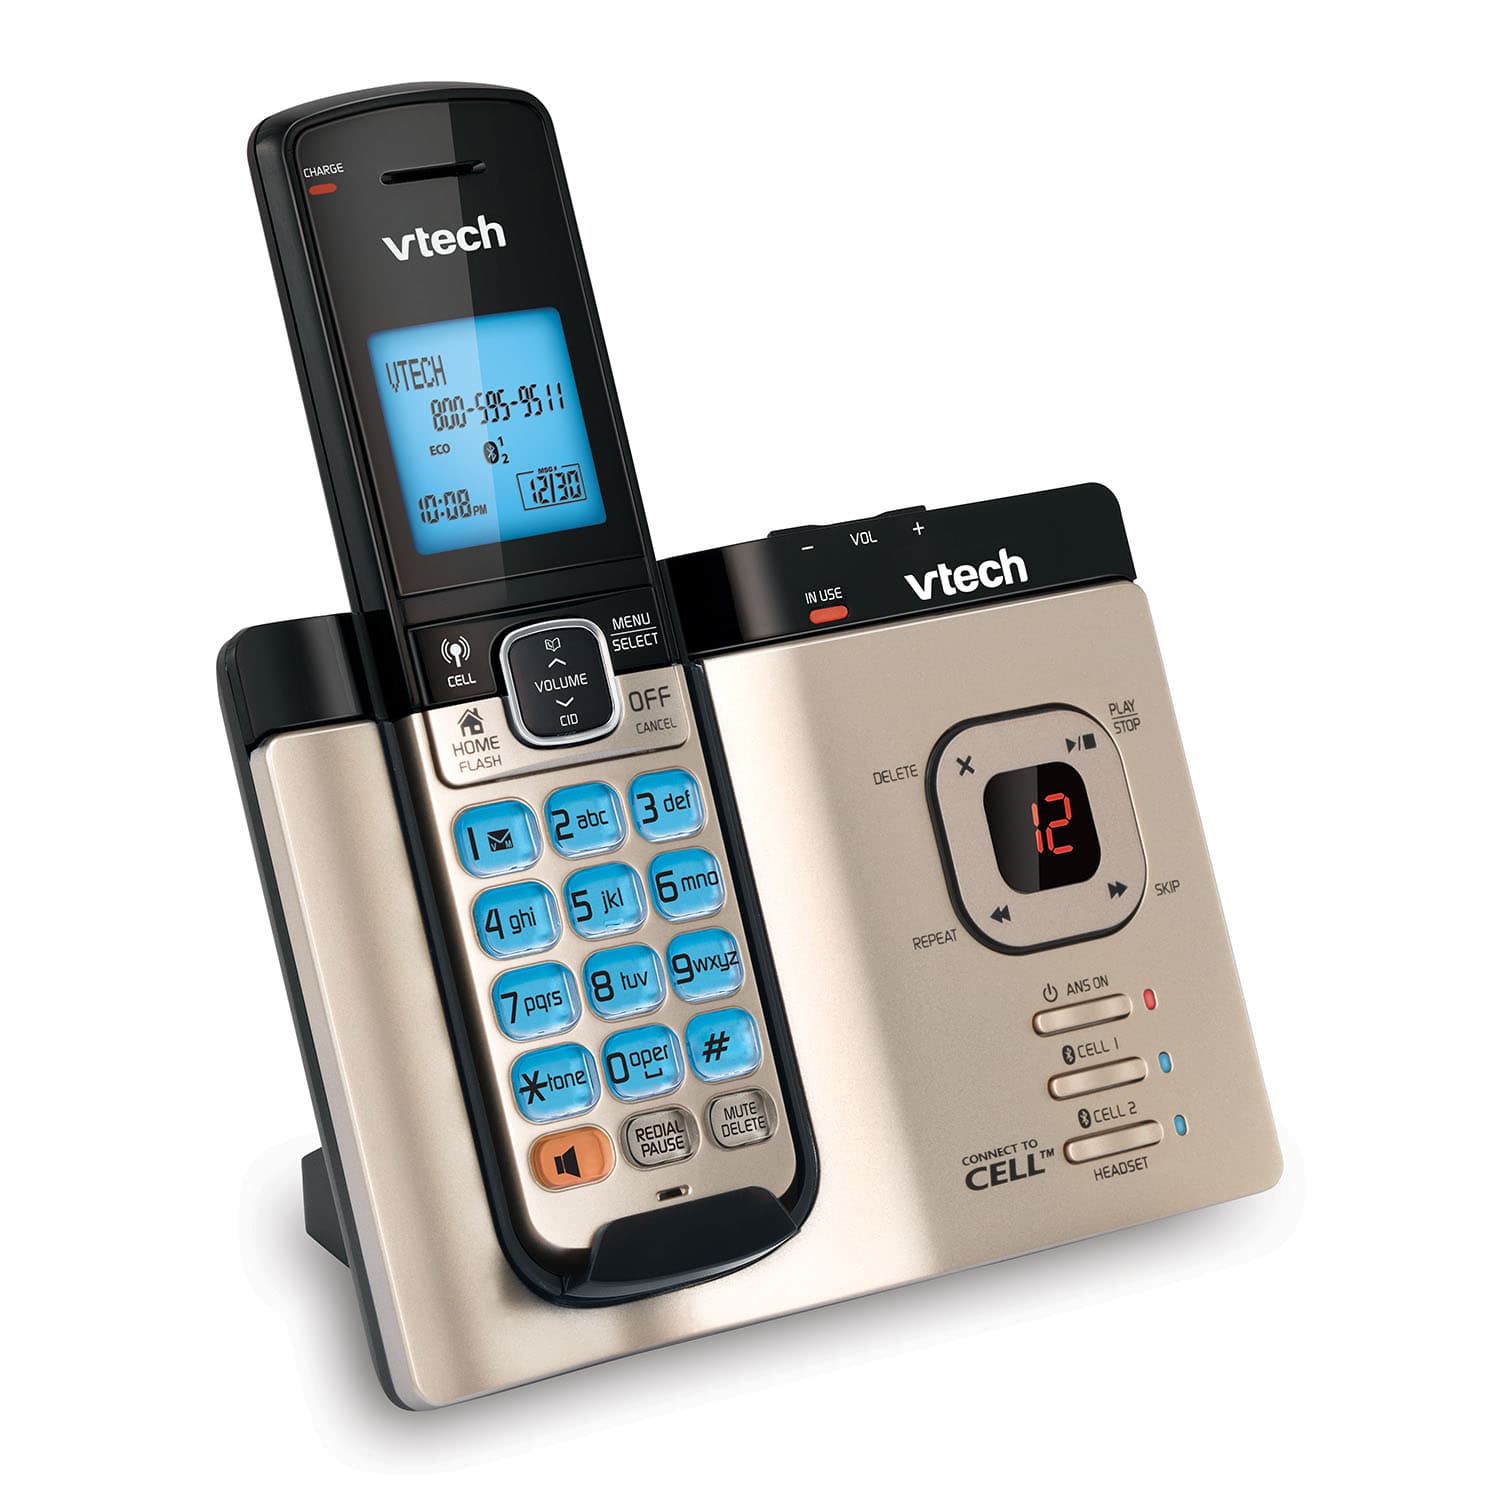 5 Handset Connect to Cell™ Phone System with Caller ID/Call Waiting - view 3